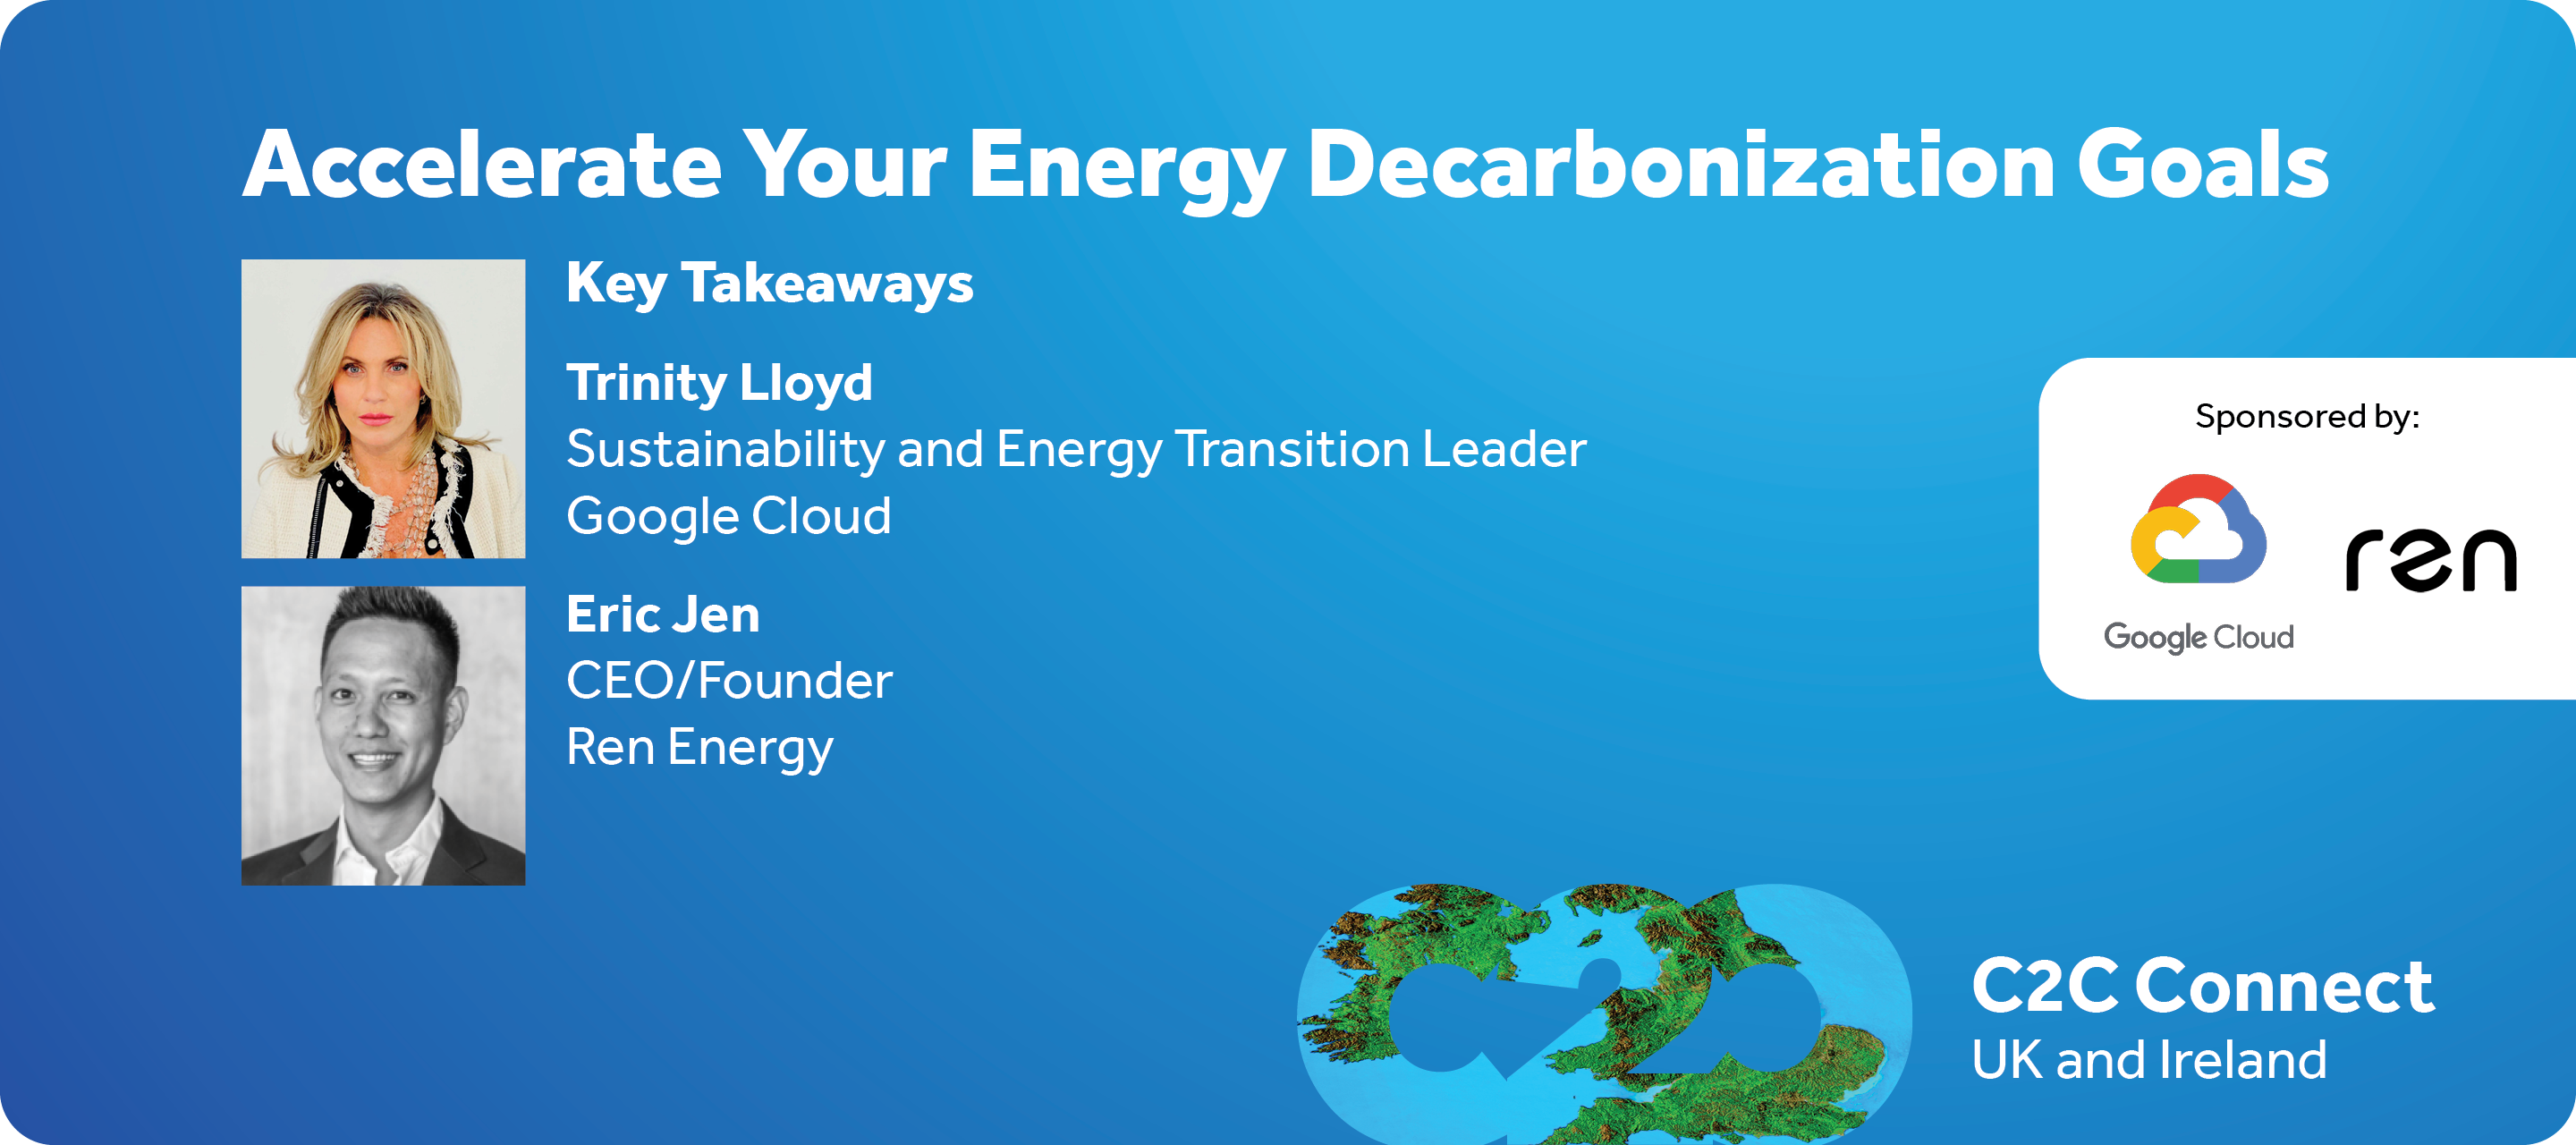 Accelerate Your Energy Decarbonization Goals - Key Takeaways